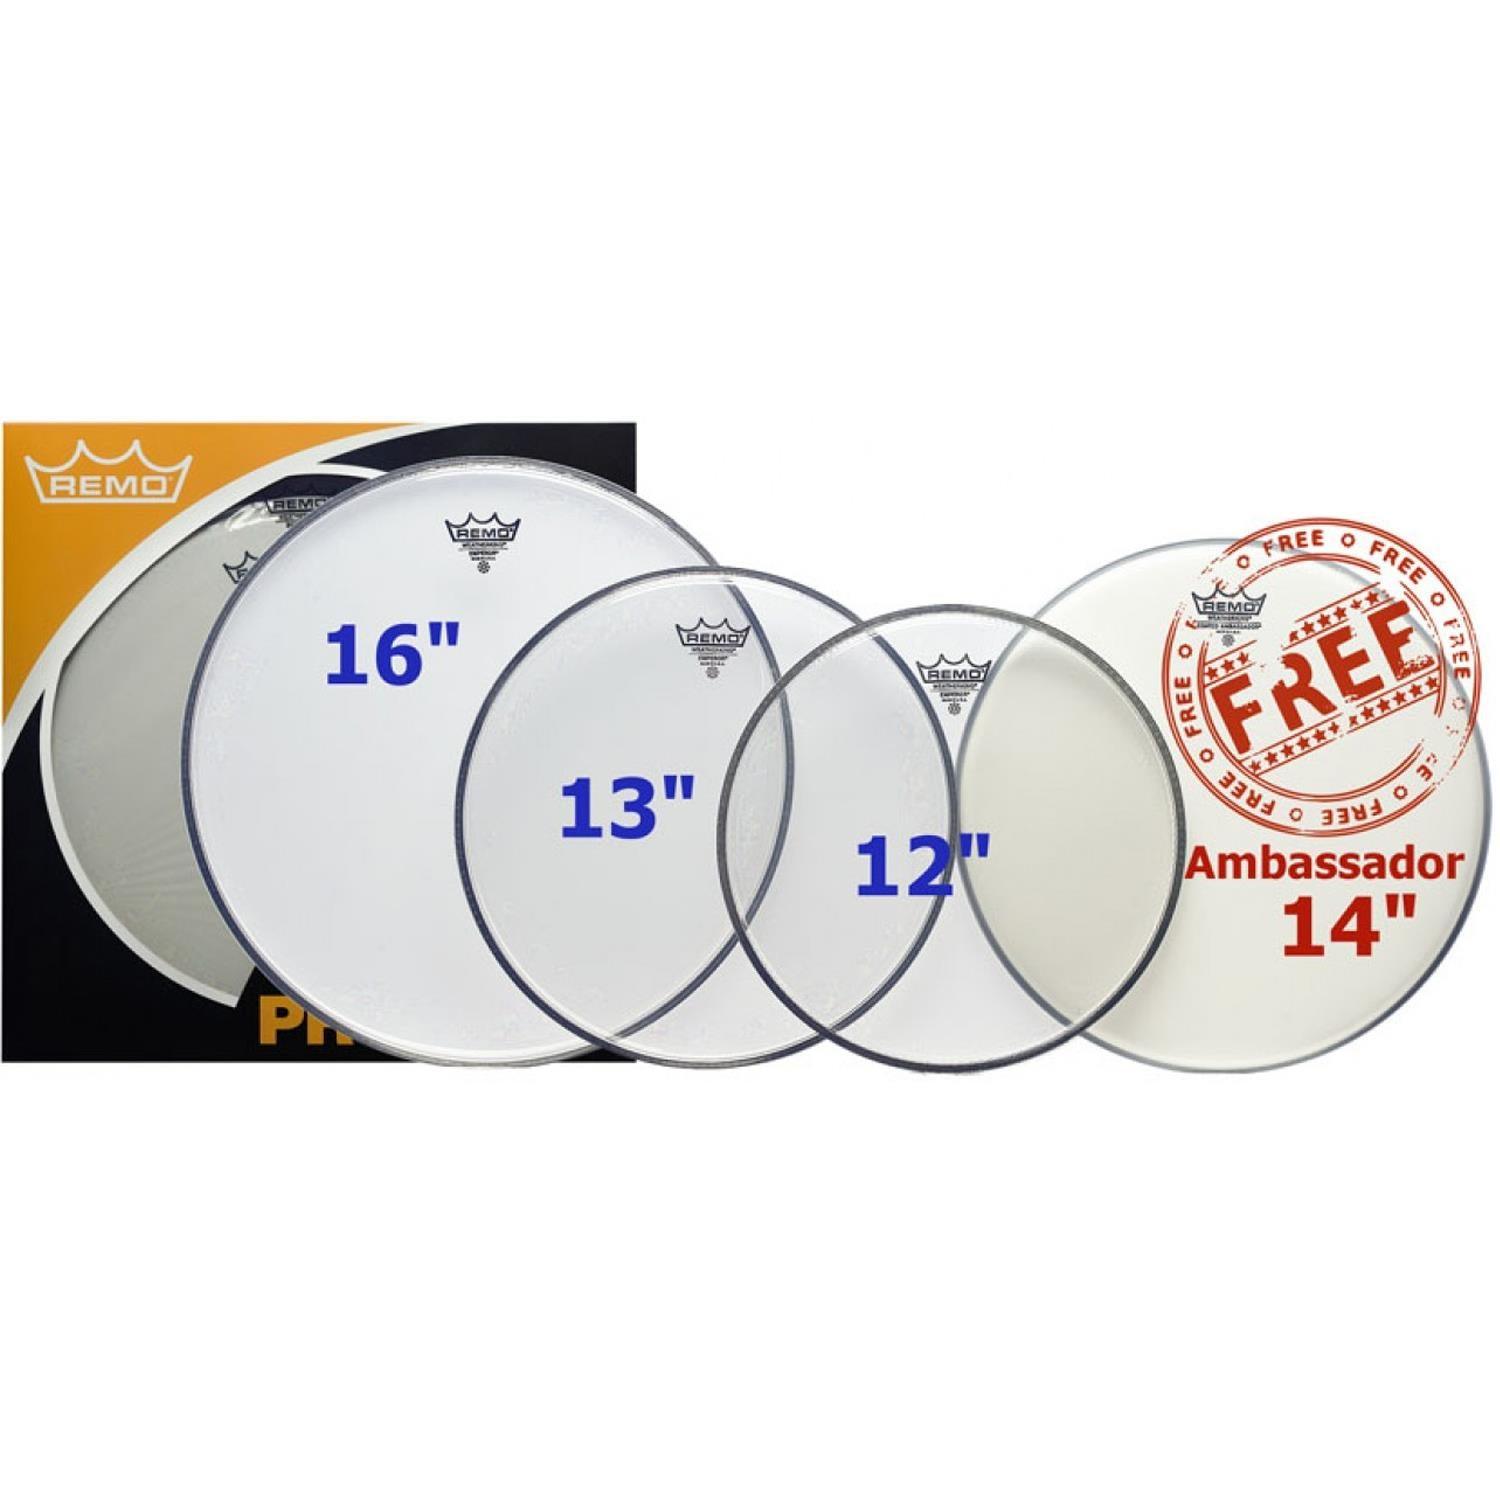 Remo PP-0250-BE Emperor Clear Rock Pro Pack Drum Heads - DY Pro Audio